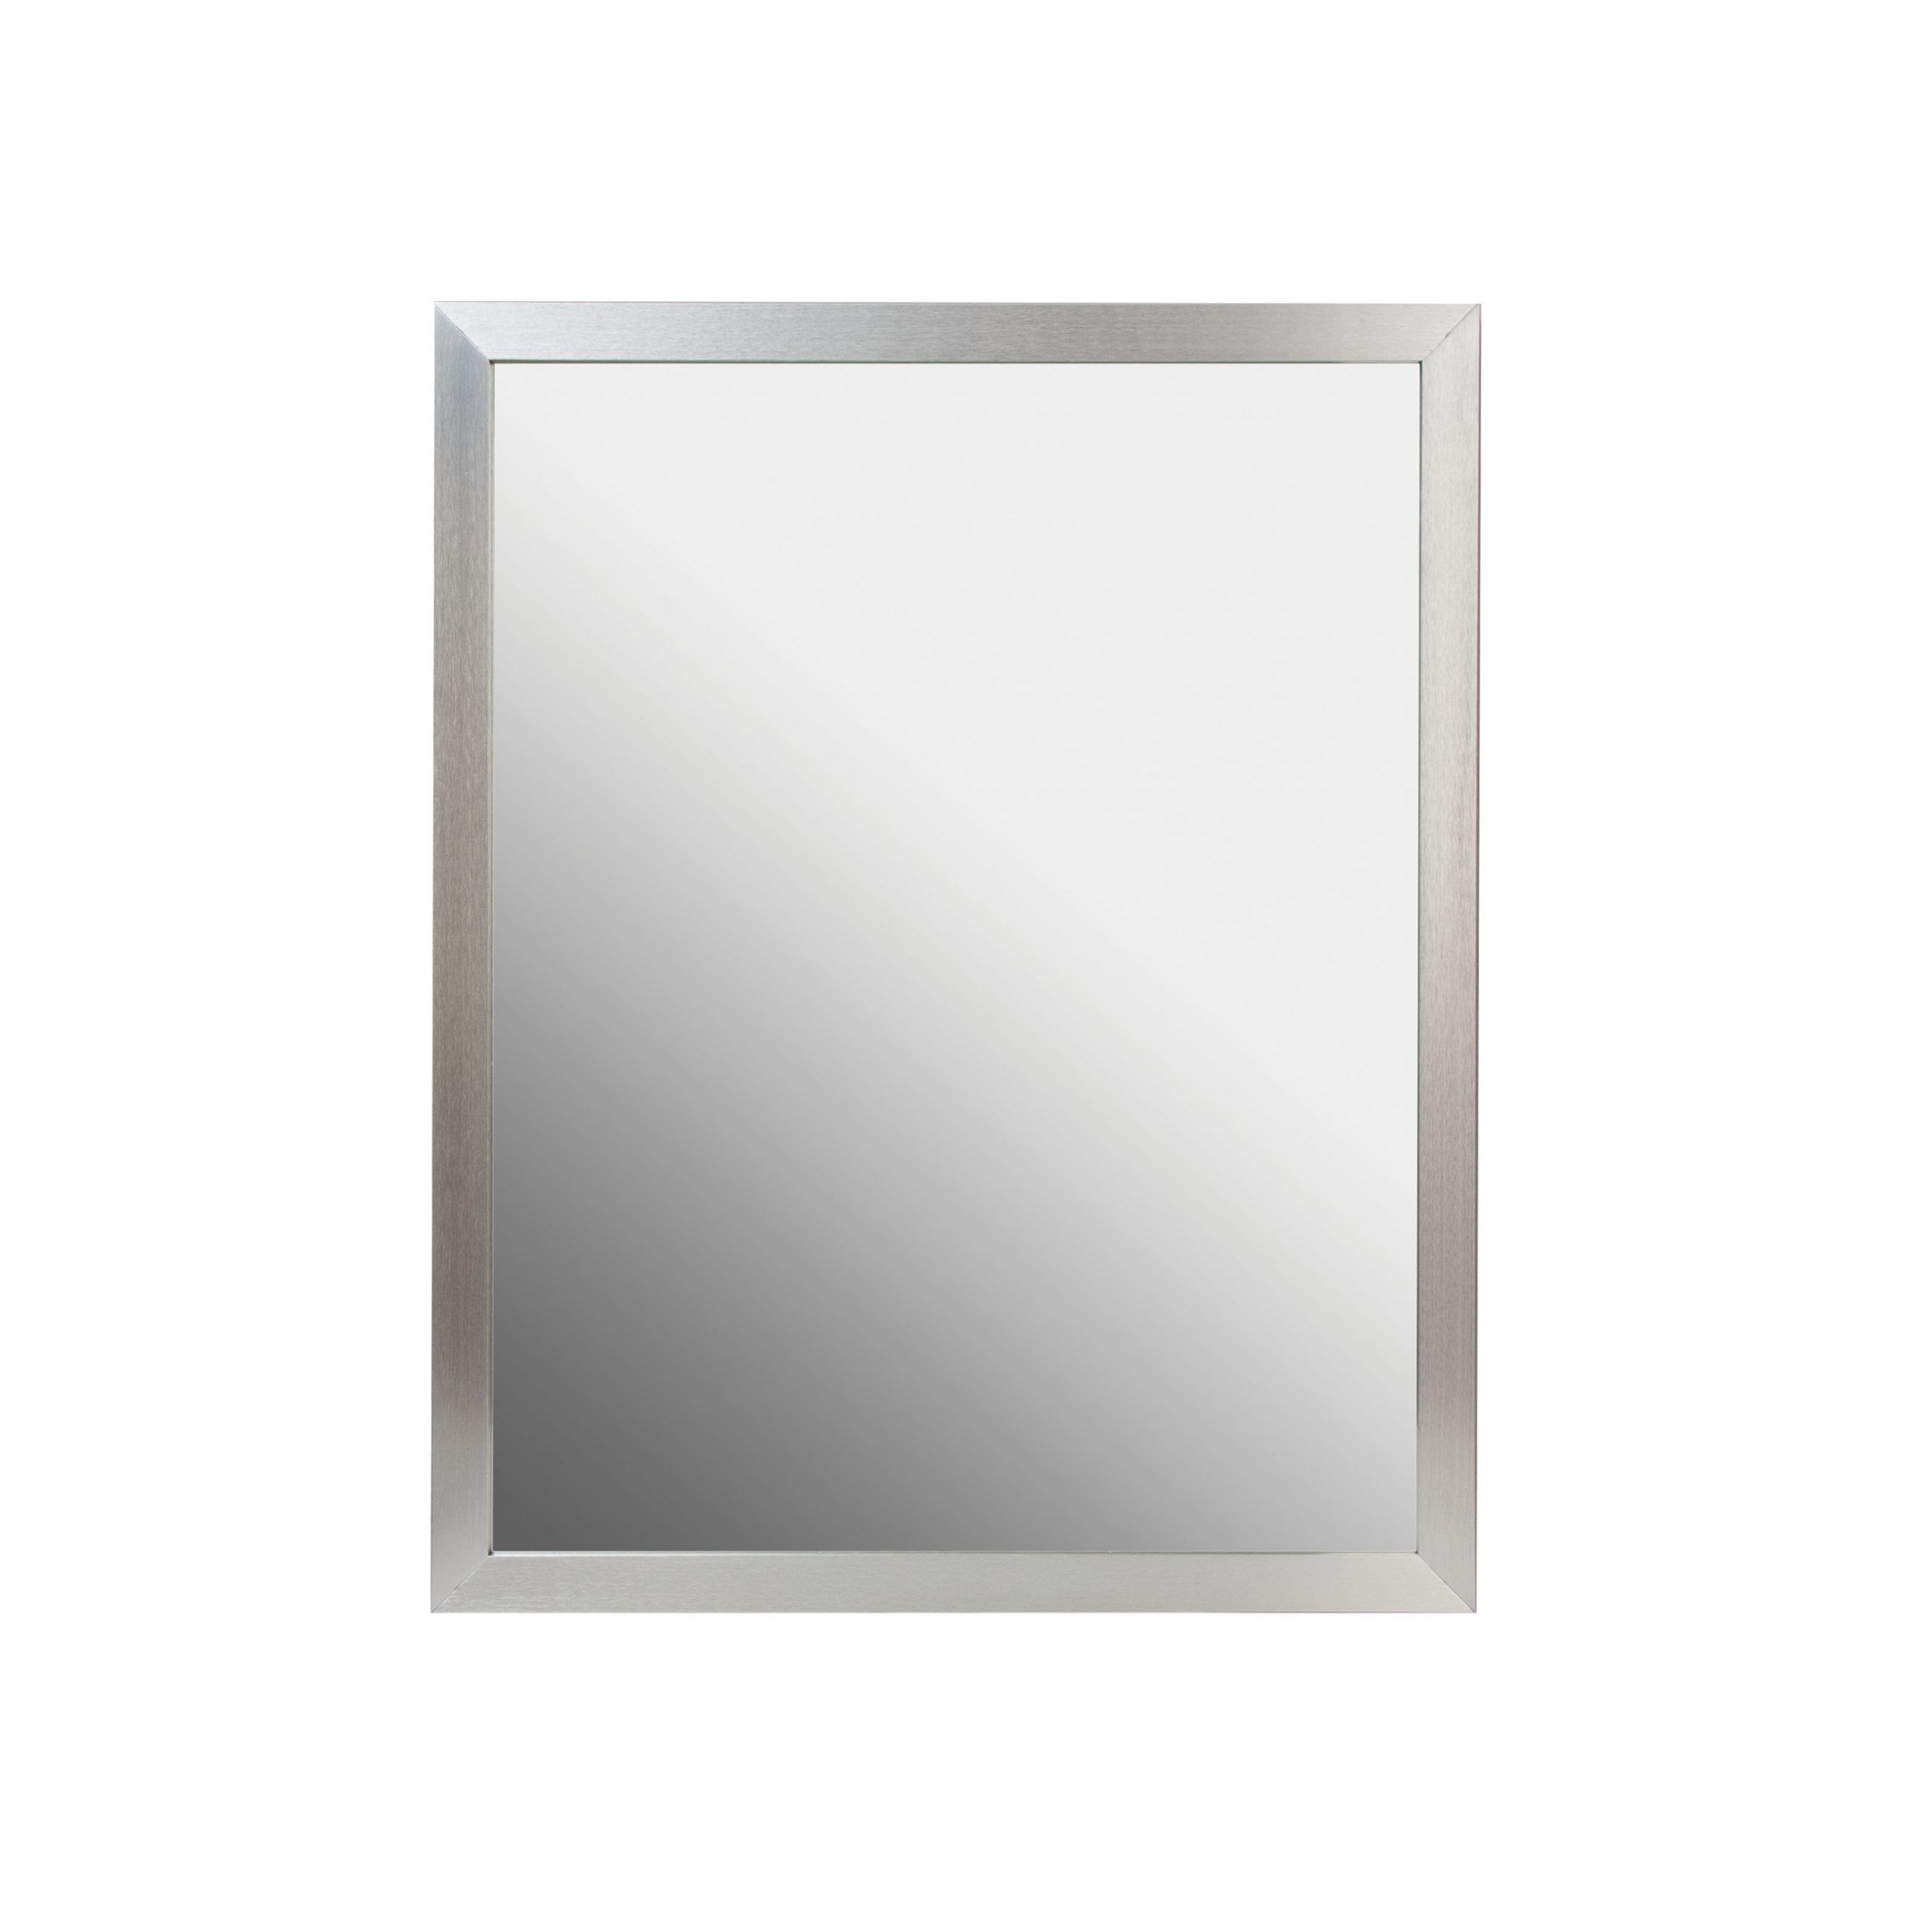 24x30 Aluminum Framed Mirror In Brushed Nickel – Foremost Bath Pertaining To Famous Brushed Nickel Octagon Mirrors (View 3 of 15)